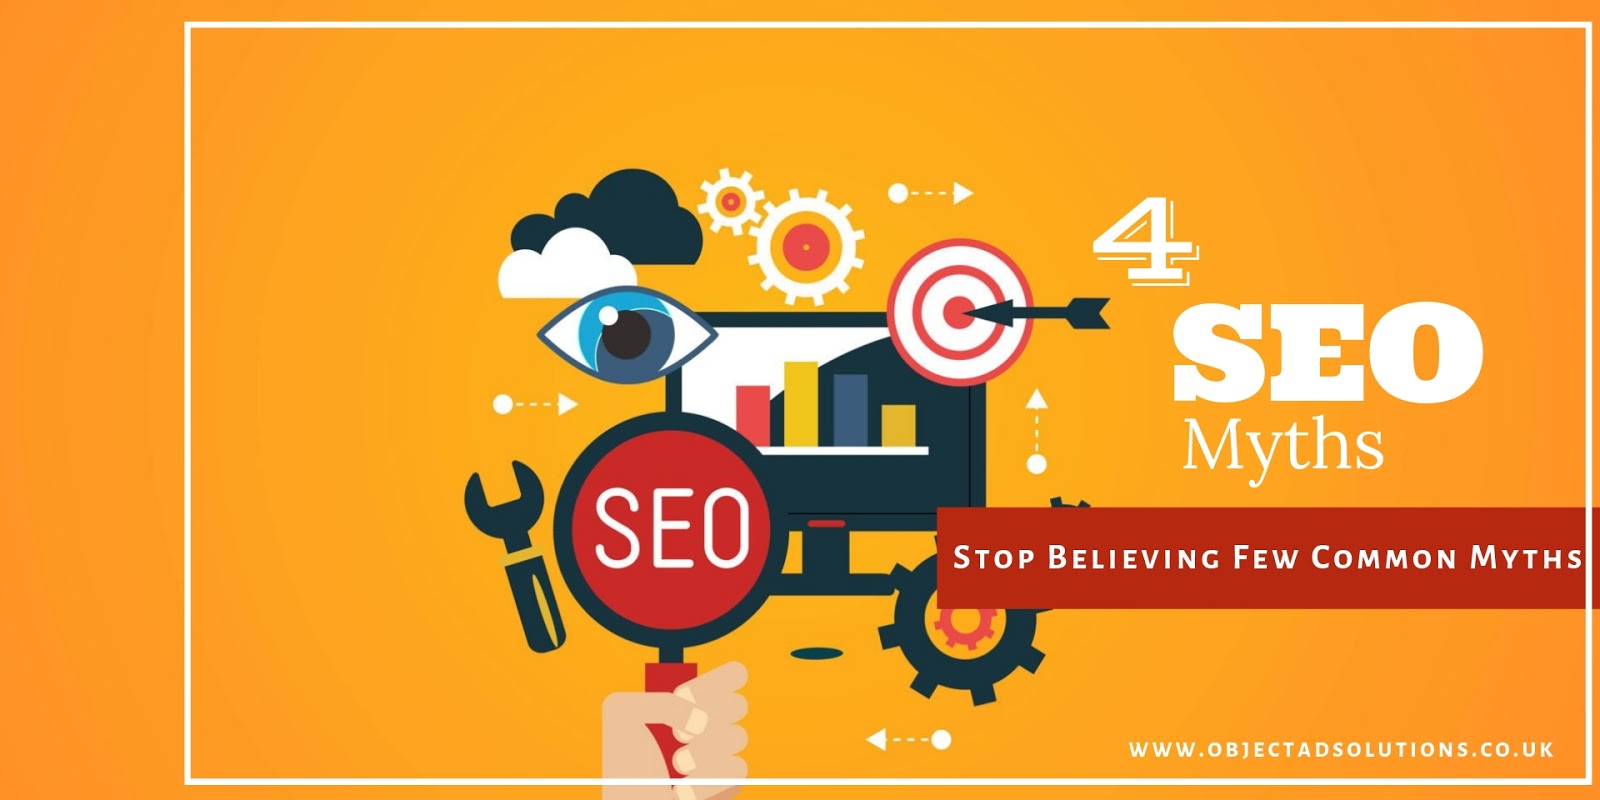 Time To Stop Believing & Following The 4 Greatest SEO Myths